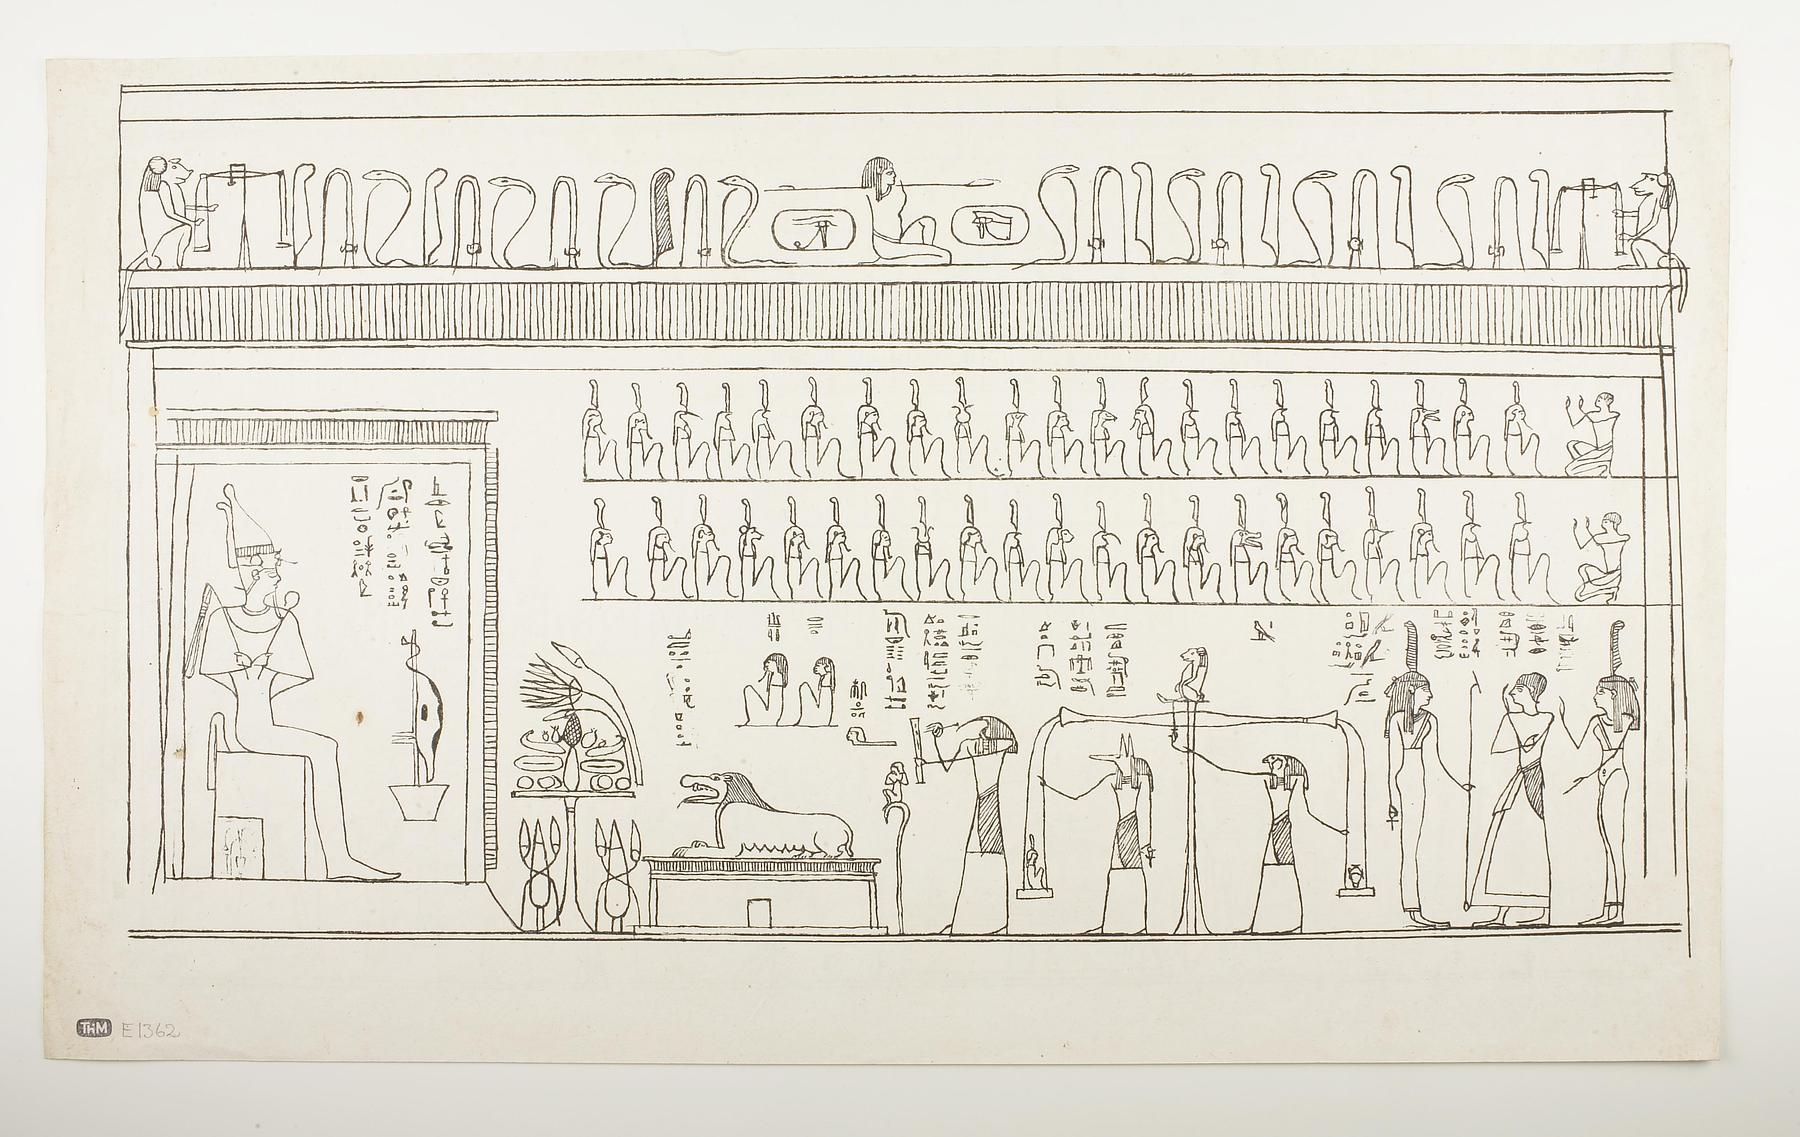 Figures and hieroglyphs from papyrus, E1362v